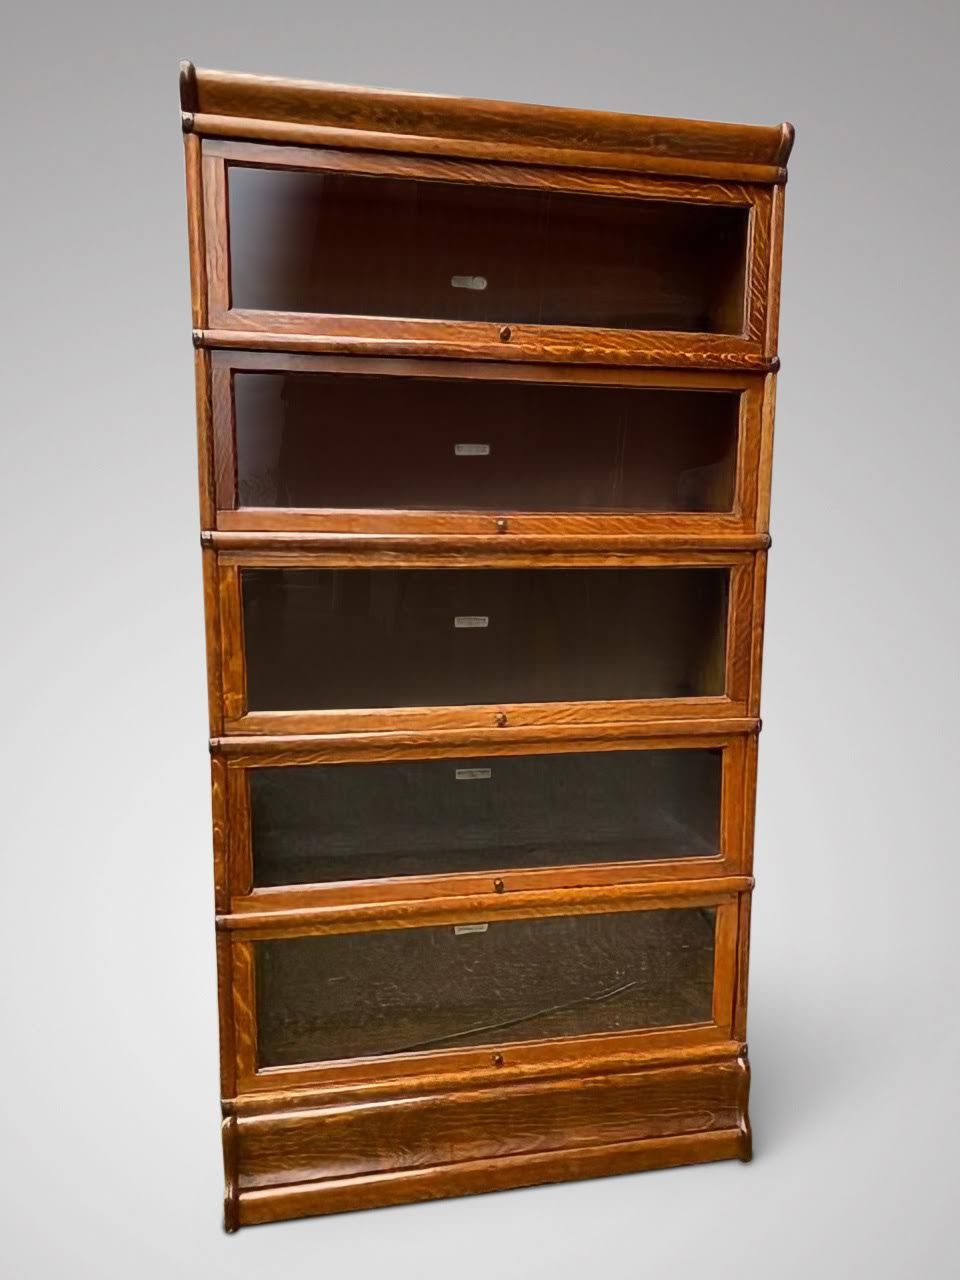 Sold/antique Tall Oak Globe Wernicke Bookcase – Antique Bookcases/cabinets For Antique Copper Bookcases (View 5 of 15)